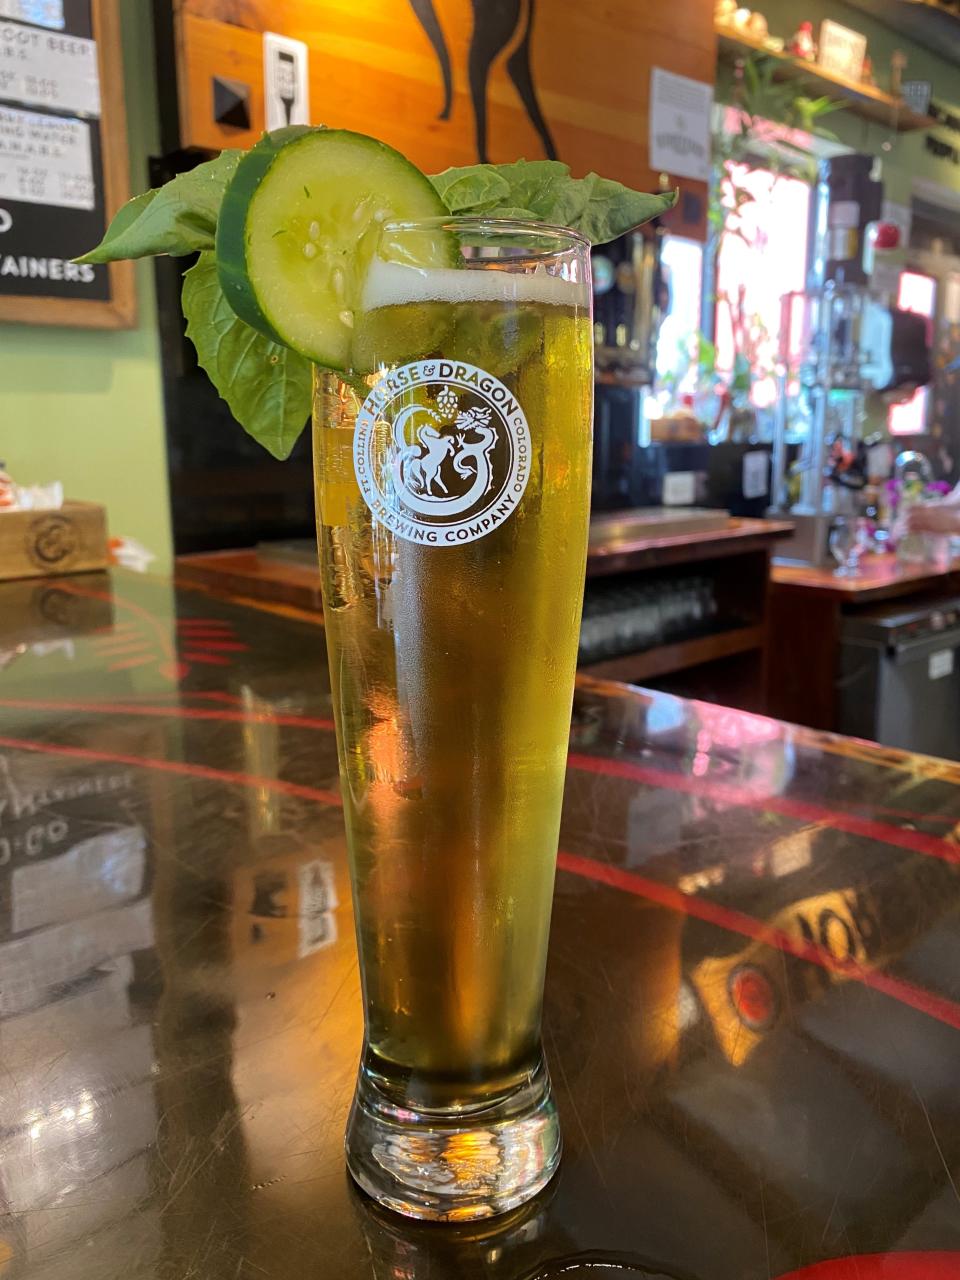 Horse & Dragon's Curious Cricket cucumber basil kolsch beer gained a following during its short-lived 2015 run, according to brewery co-founder Carol Cochran.